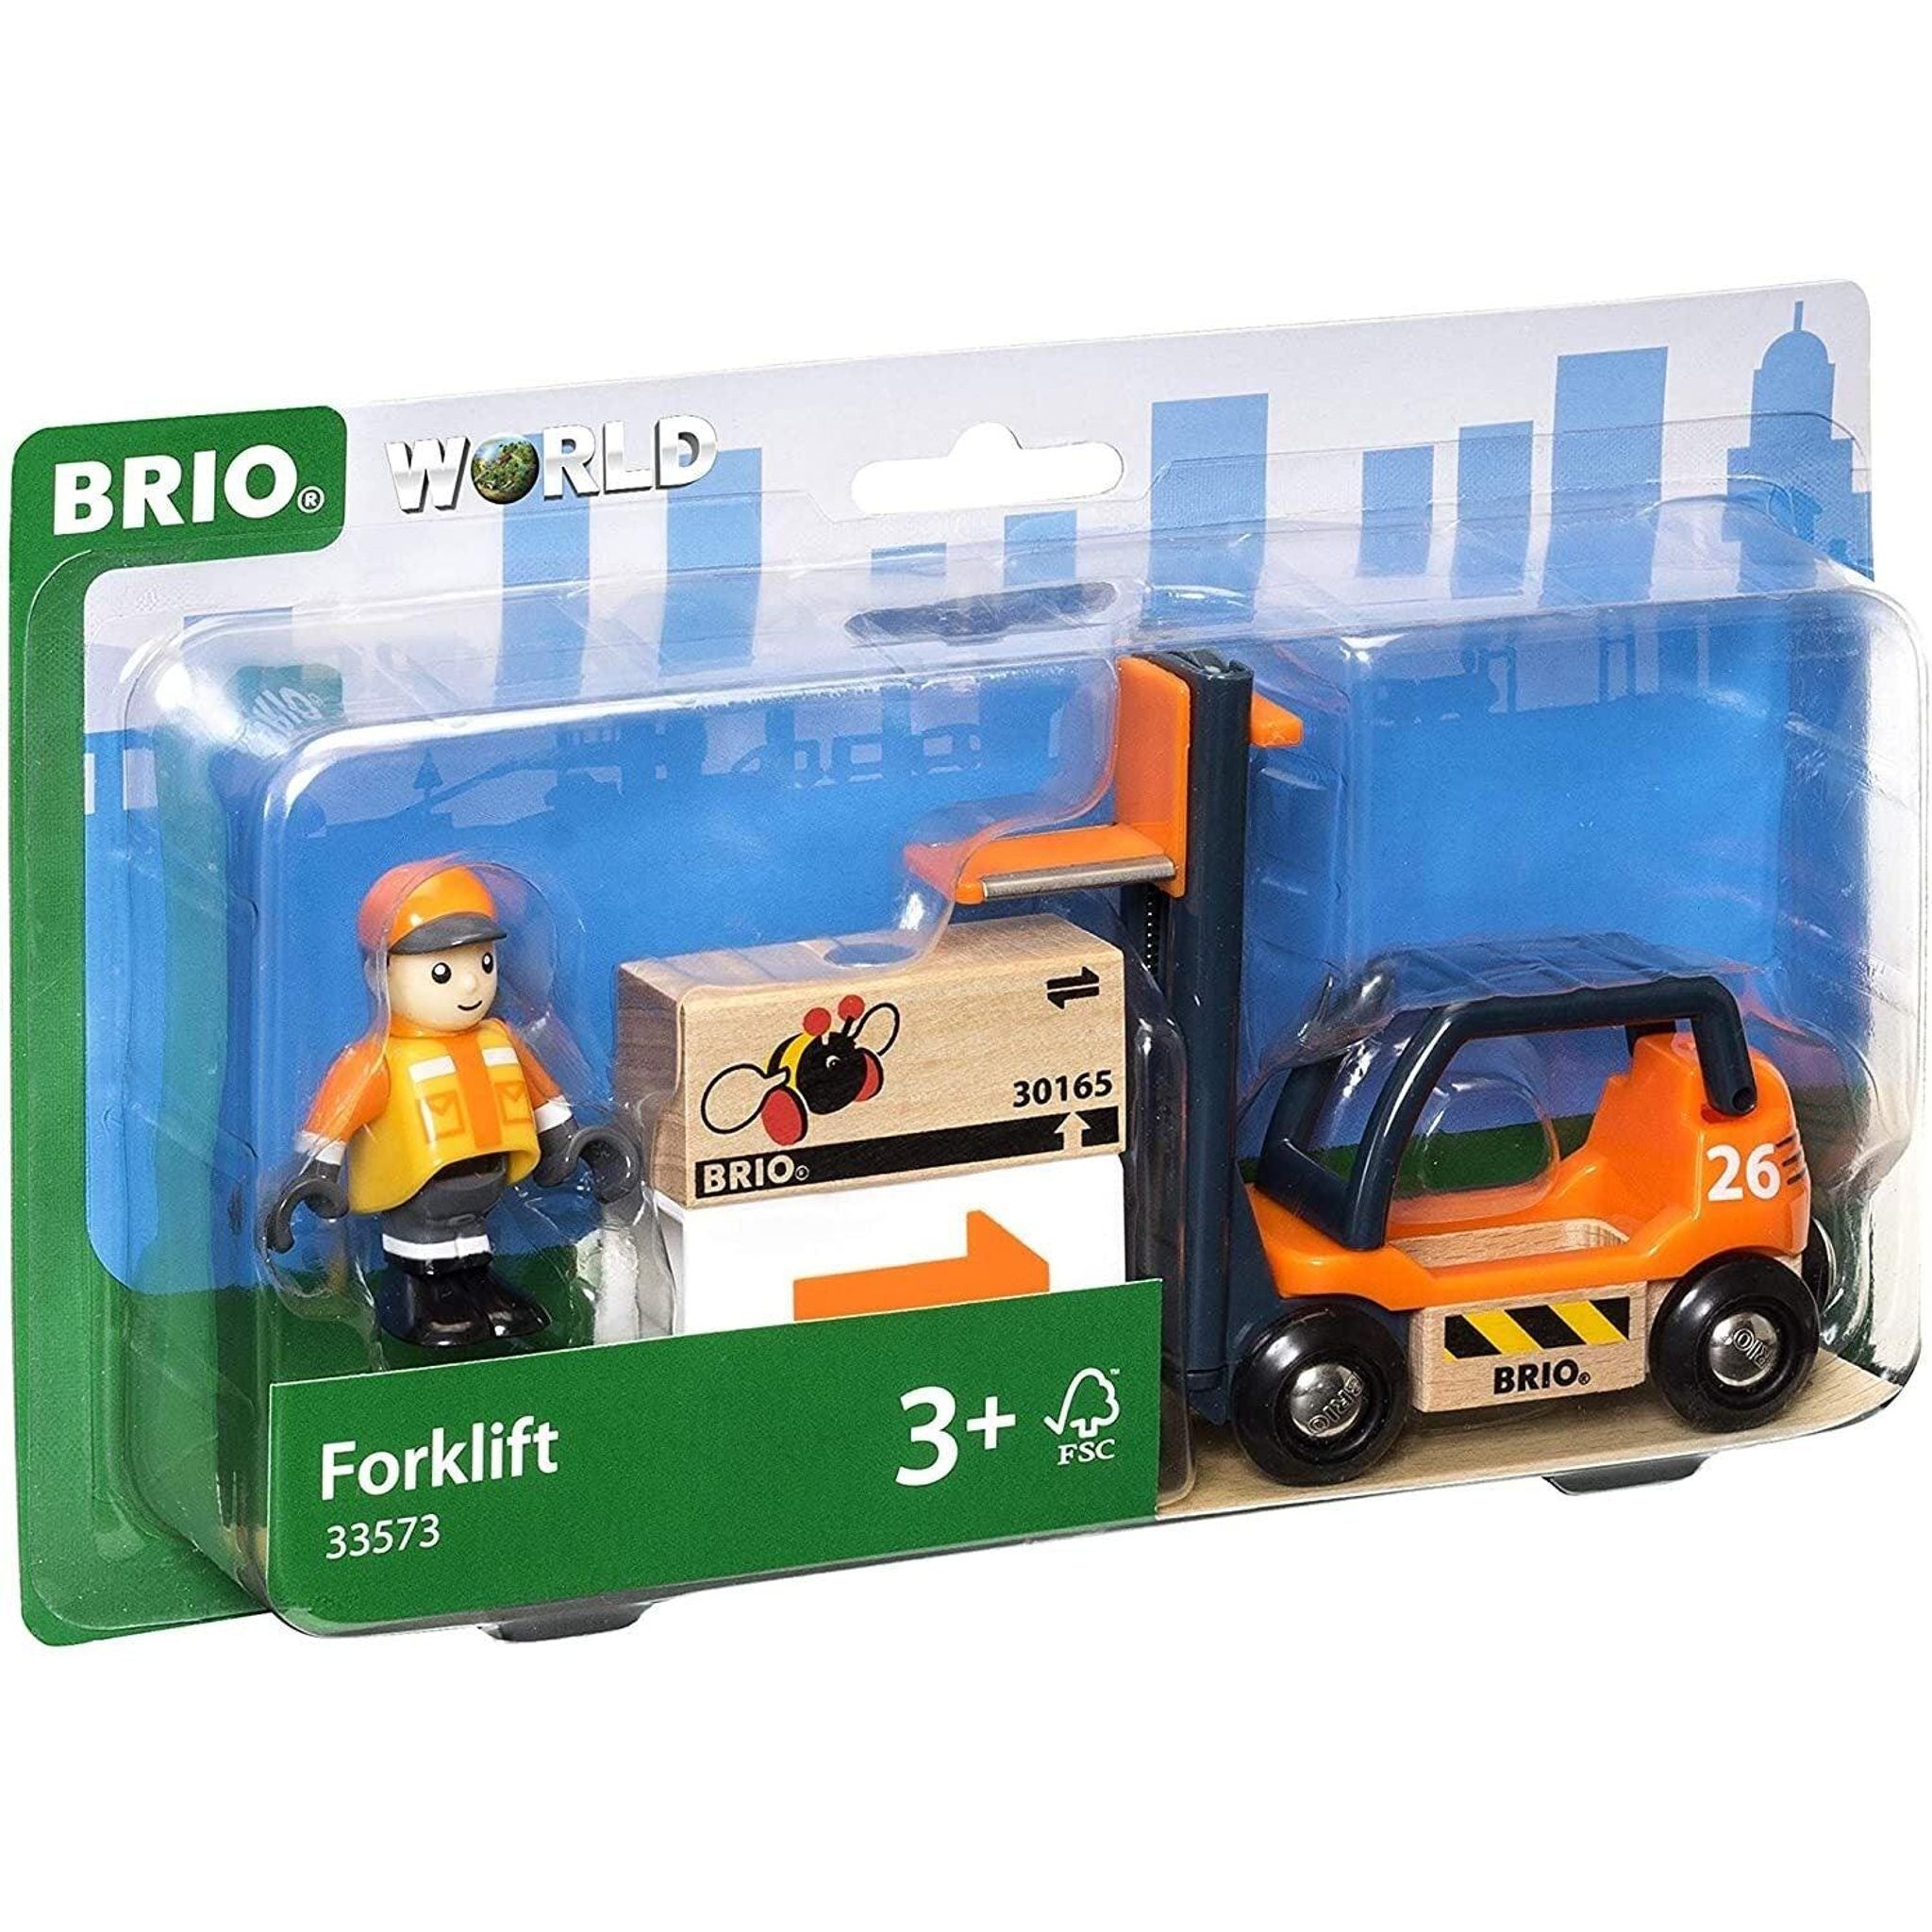 BRIO Vehicle - Forklift 4 pieces - Toybox Tales